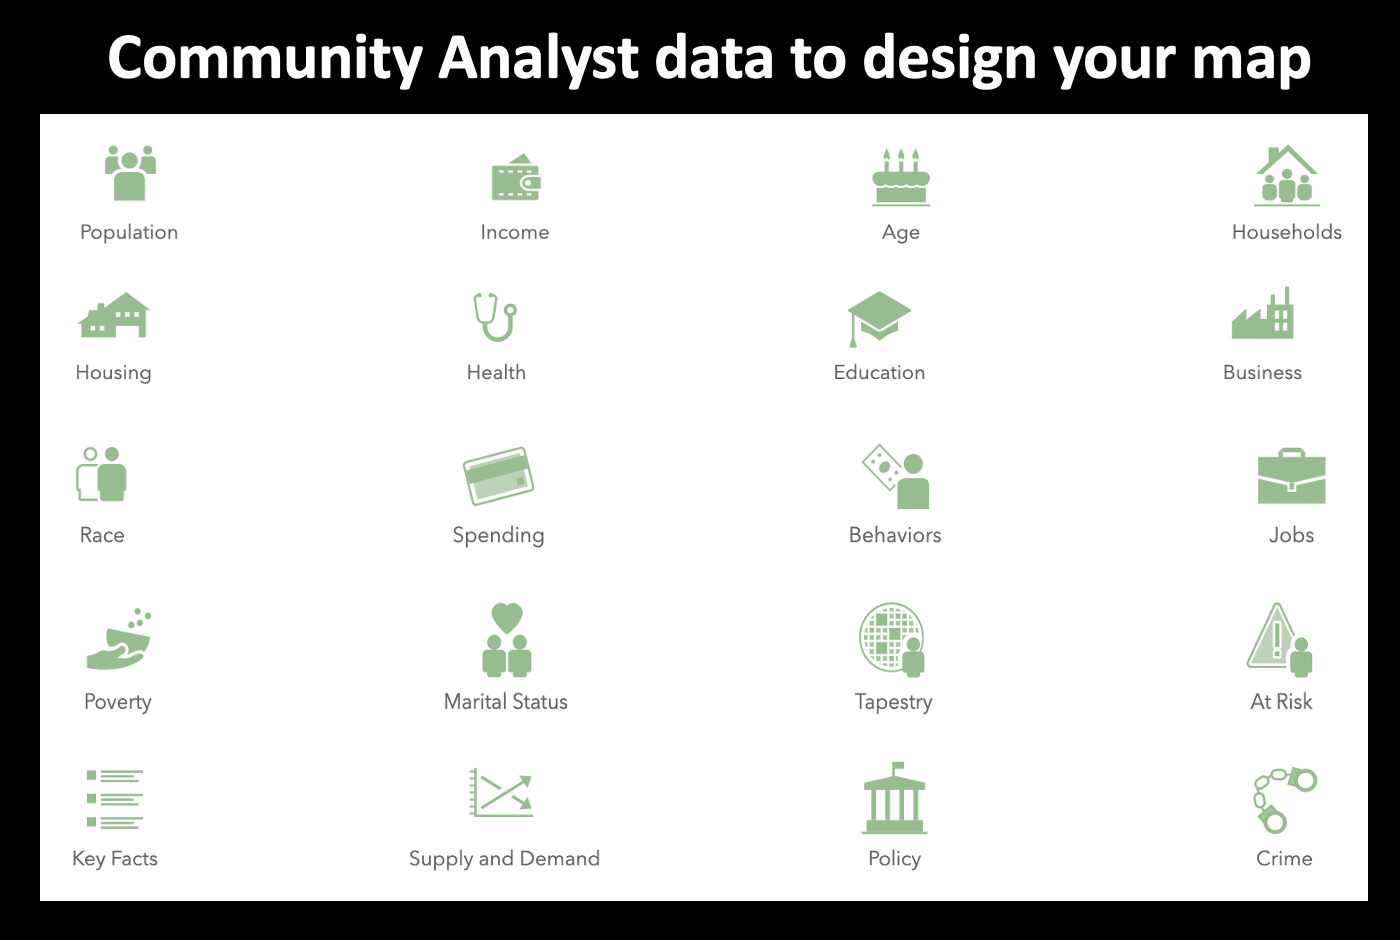 Community Analyst data available to design your Community of interest map